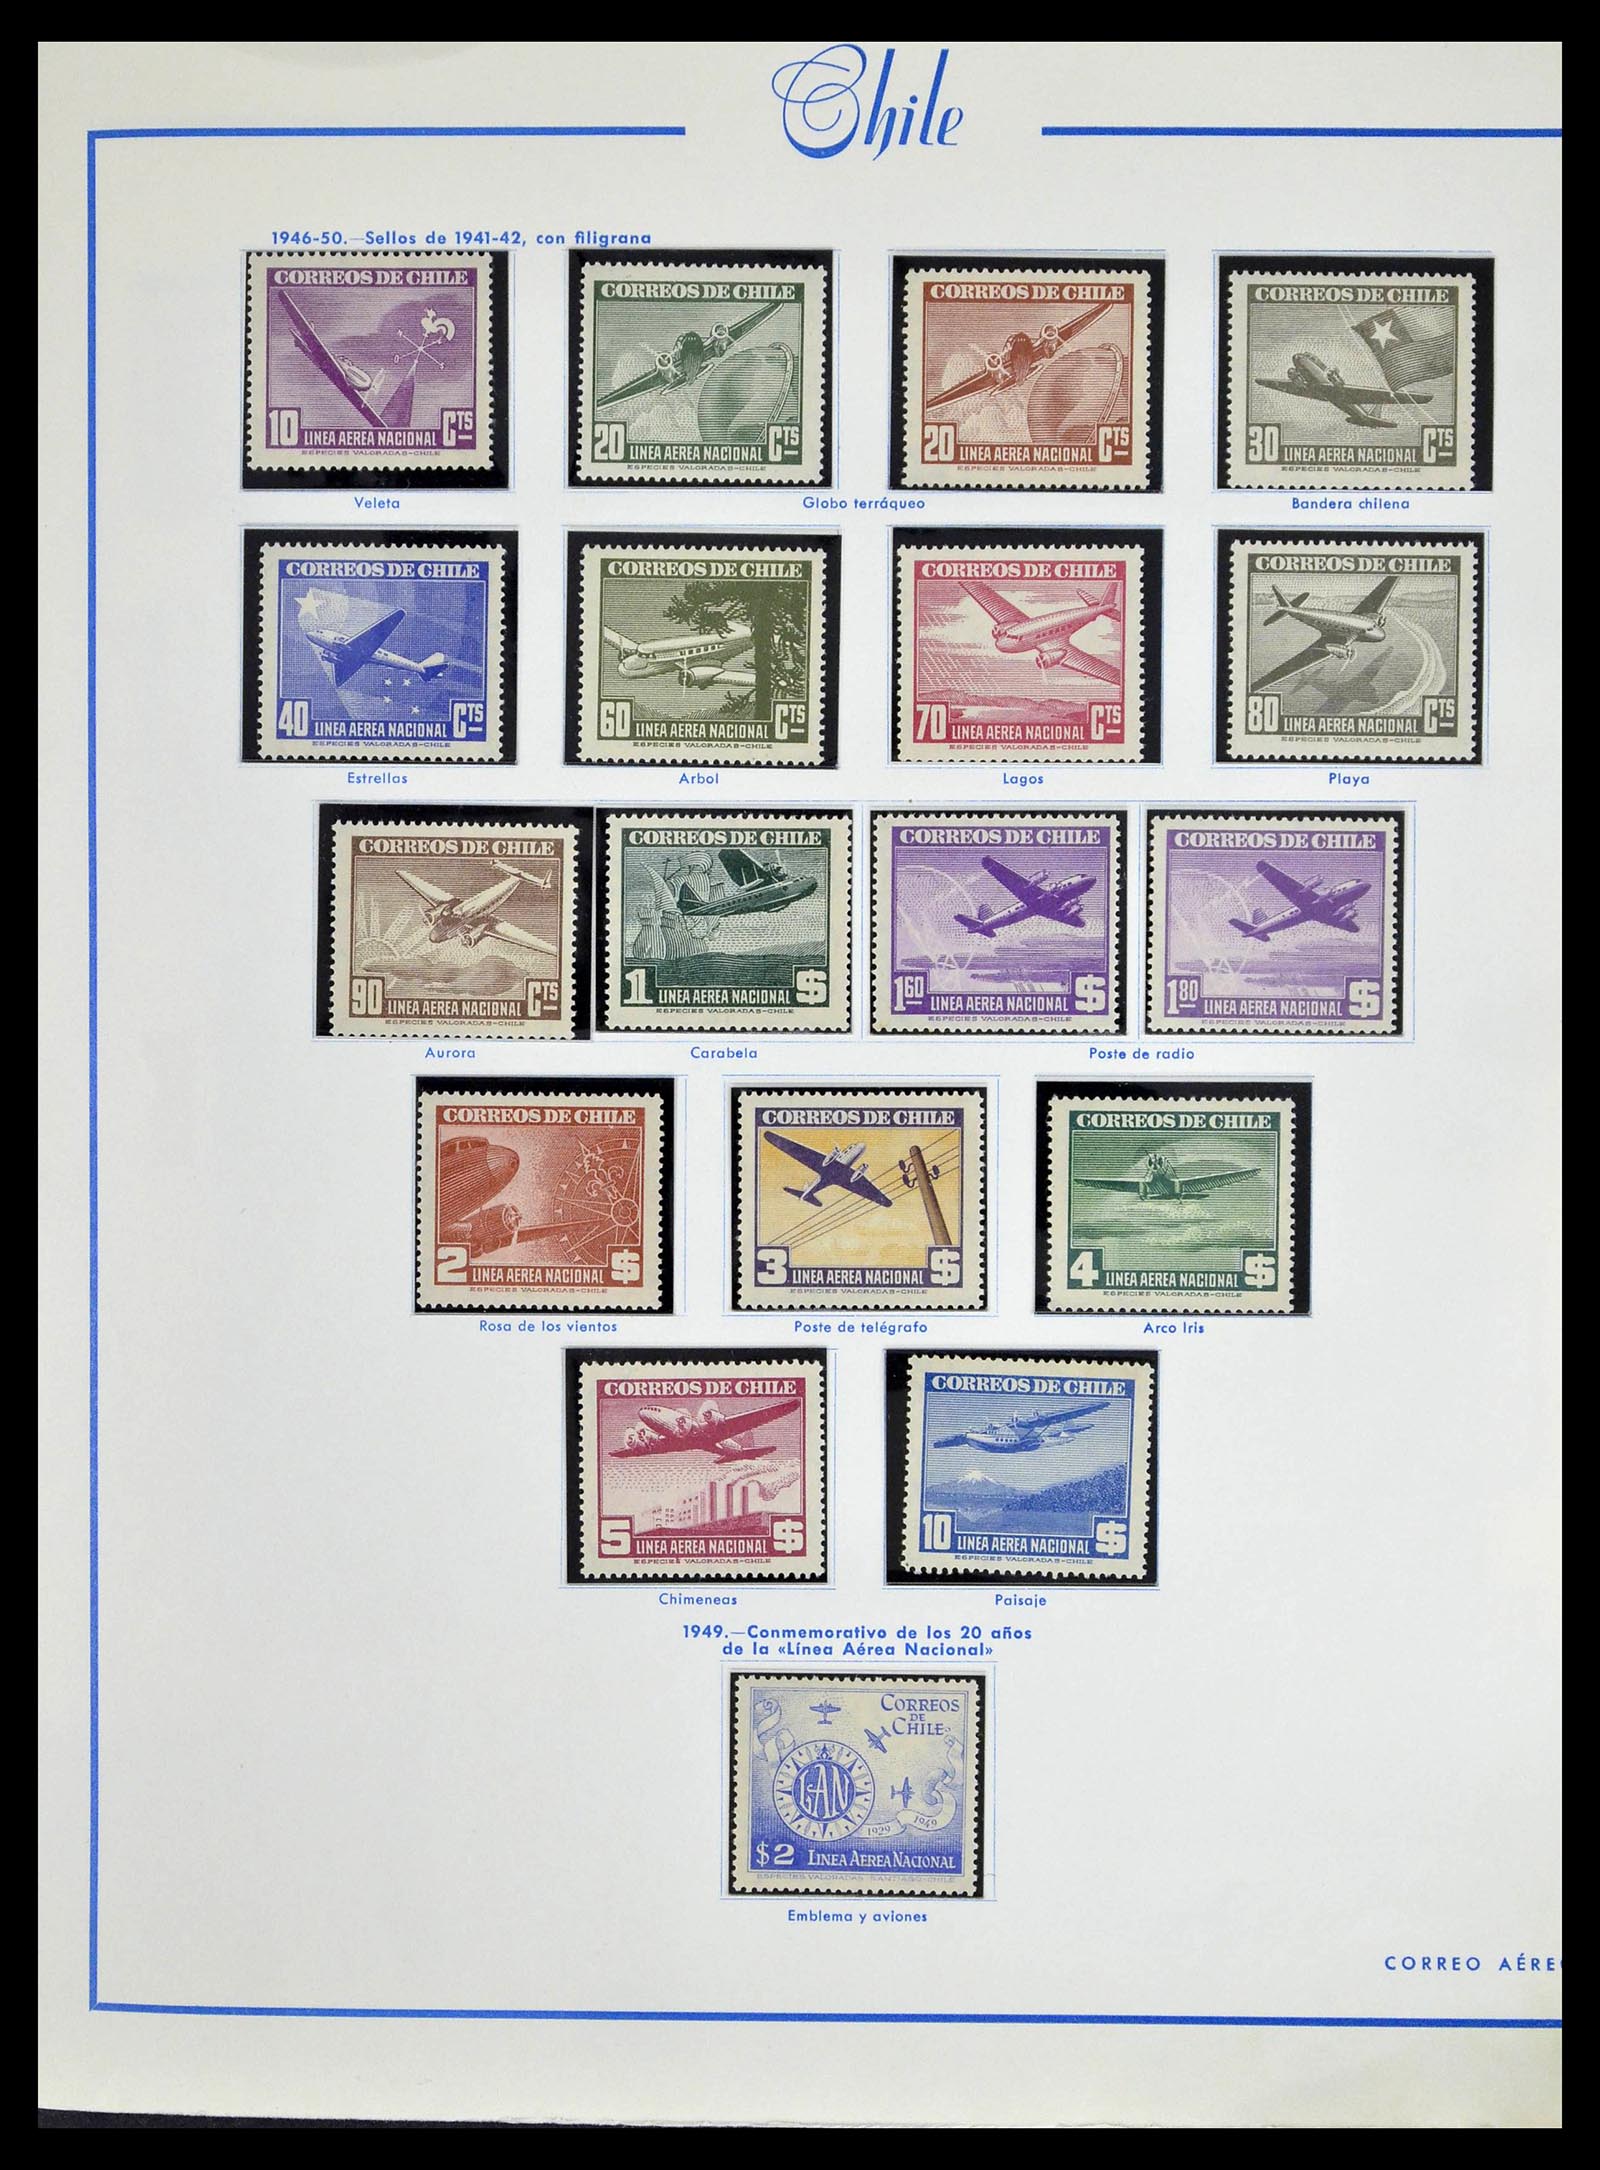 39213 0048 - Stamp collection 39213 Chile 1853-1970.